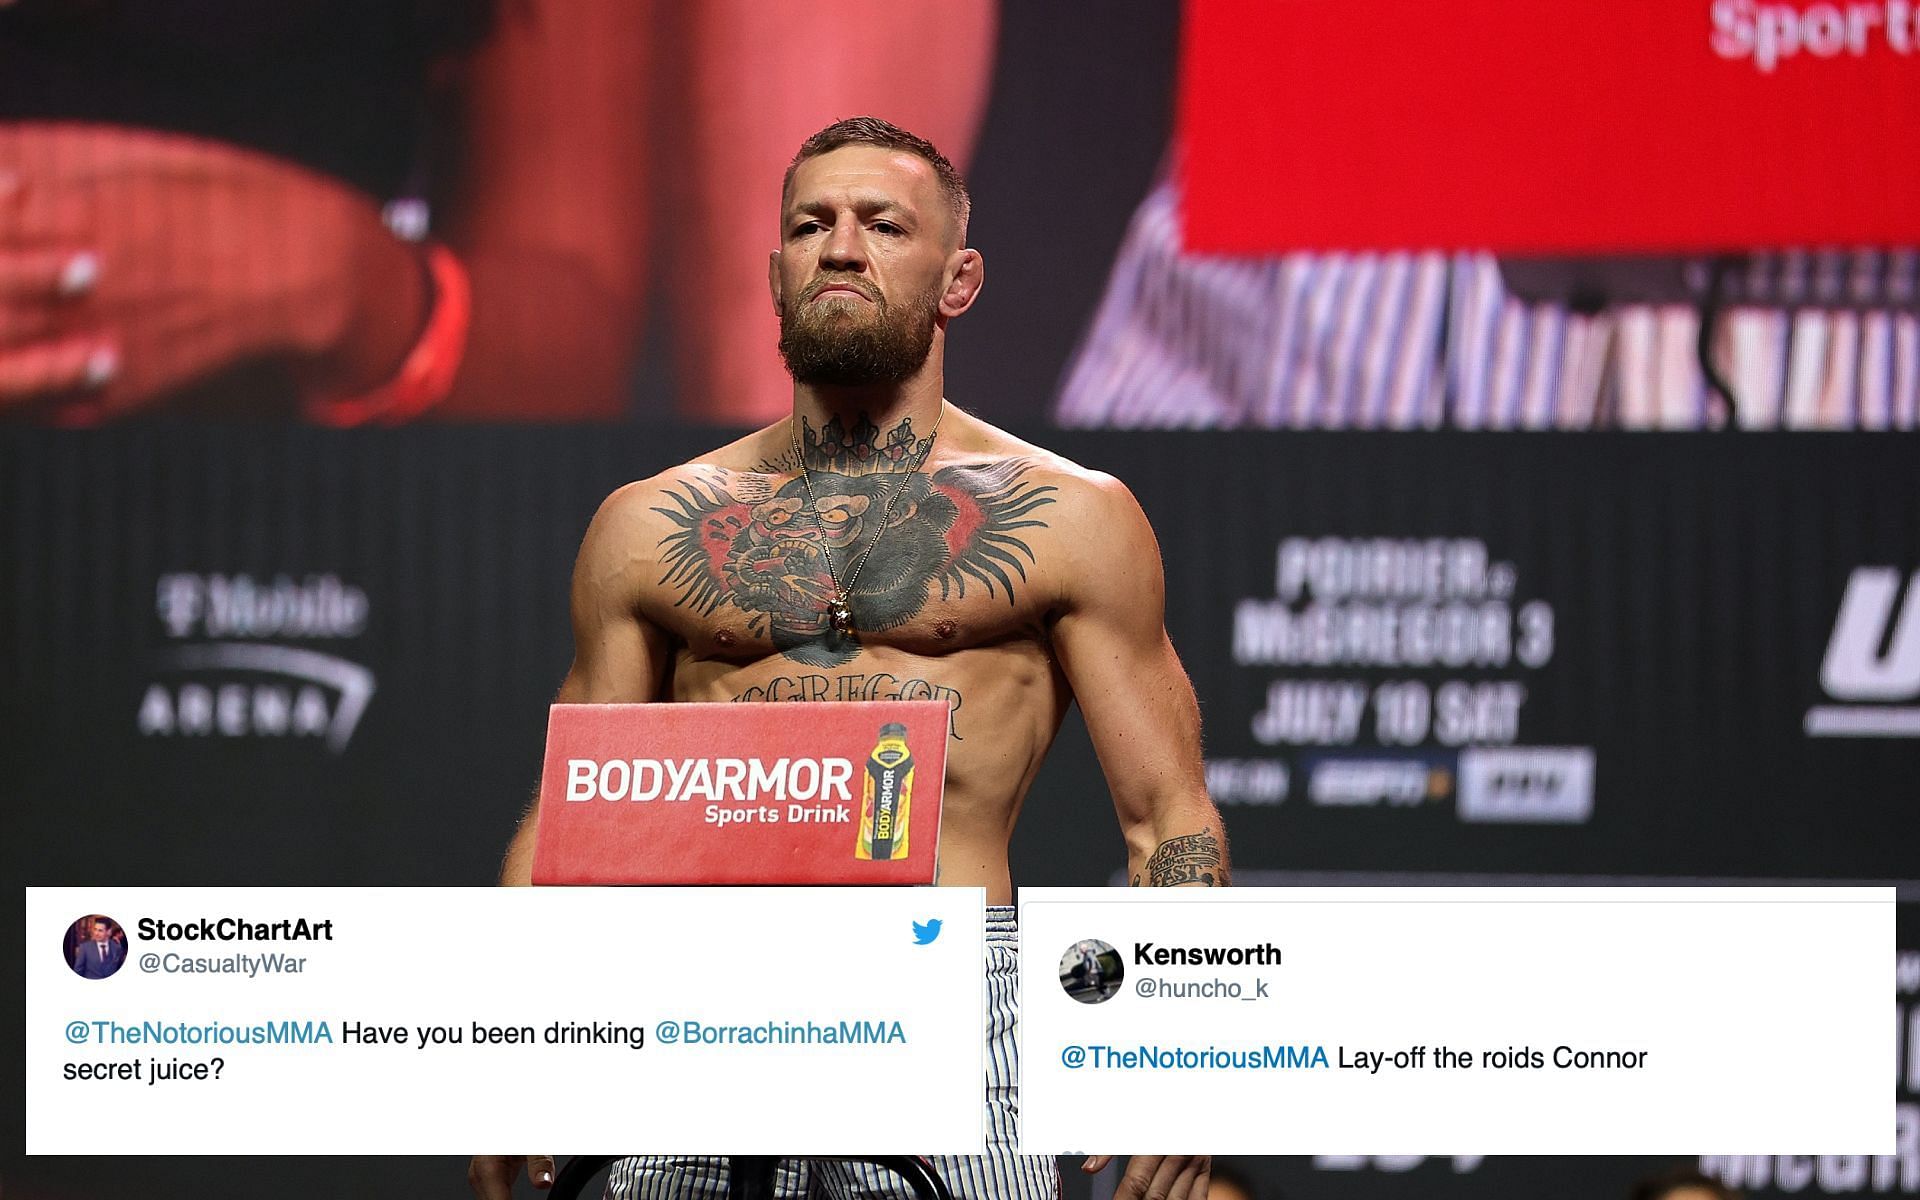 (Image credit @TheNotoriousMMA on Twitter)